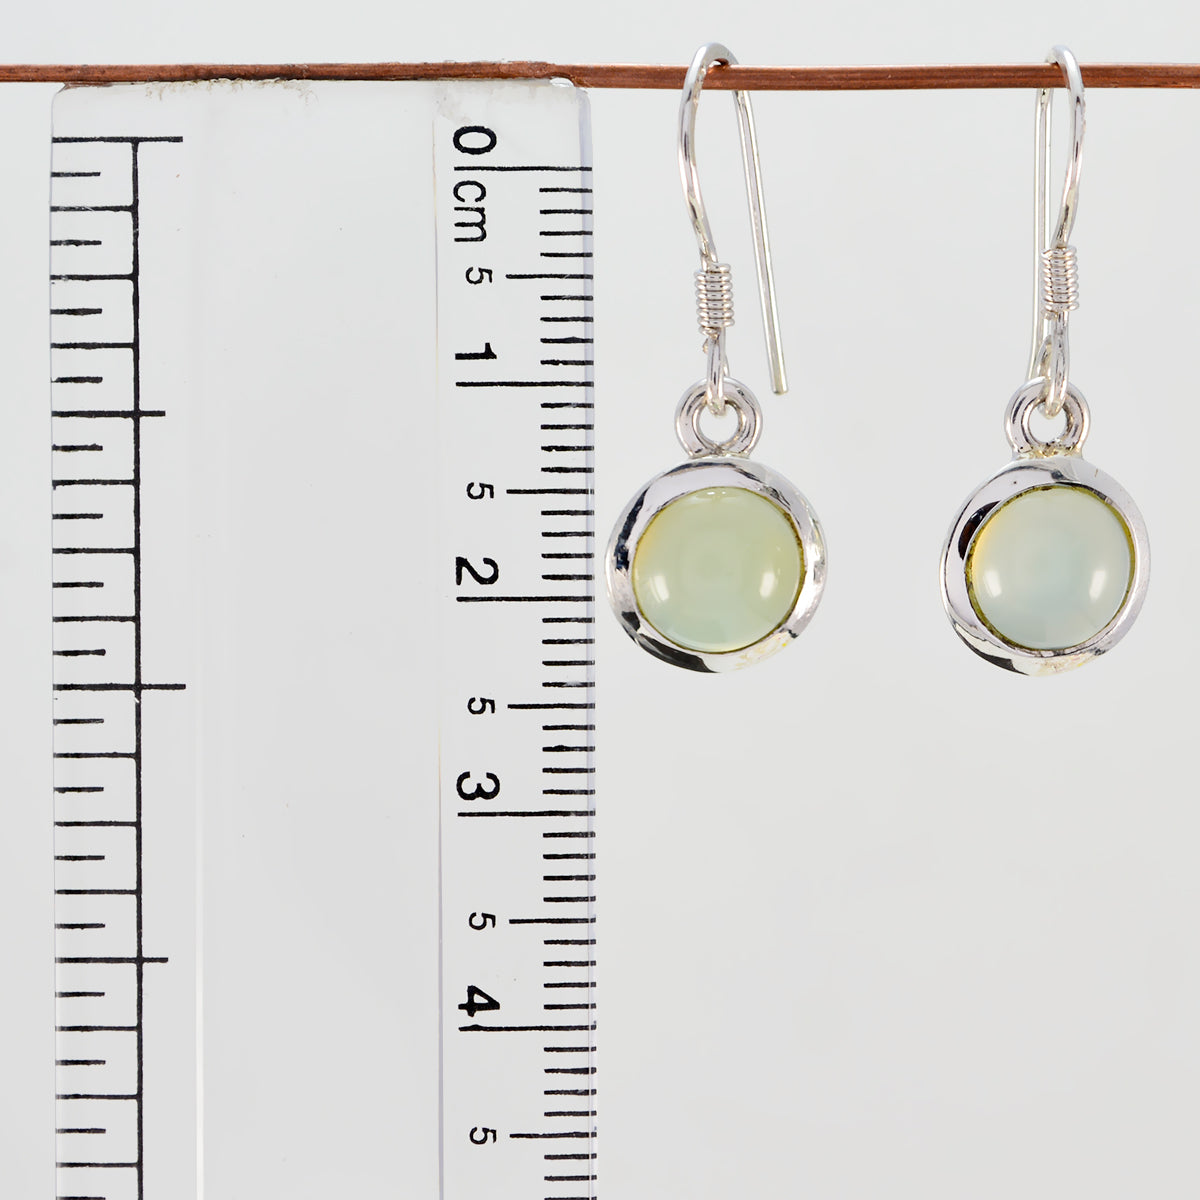 Riyo Natural Gemstone round Faceted Blue Chalcedony Silver Earring gift for thanks giving